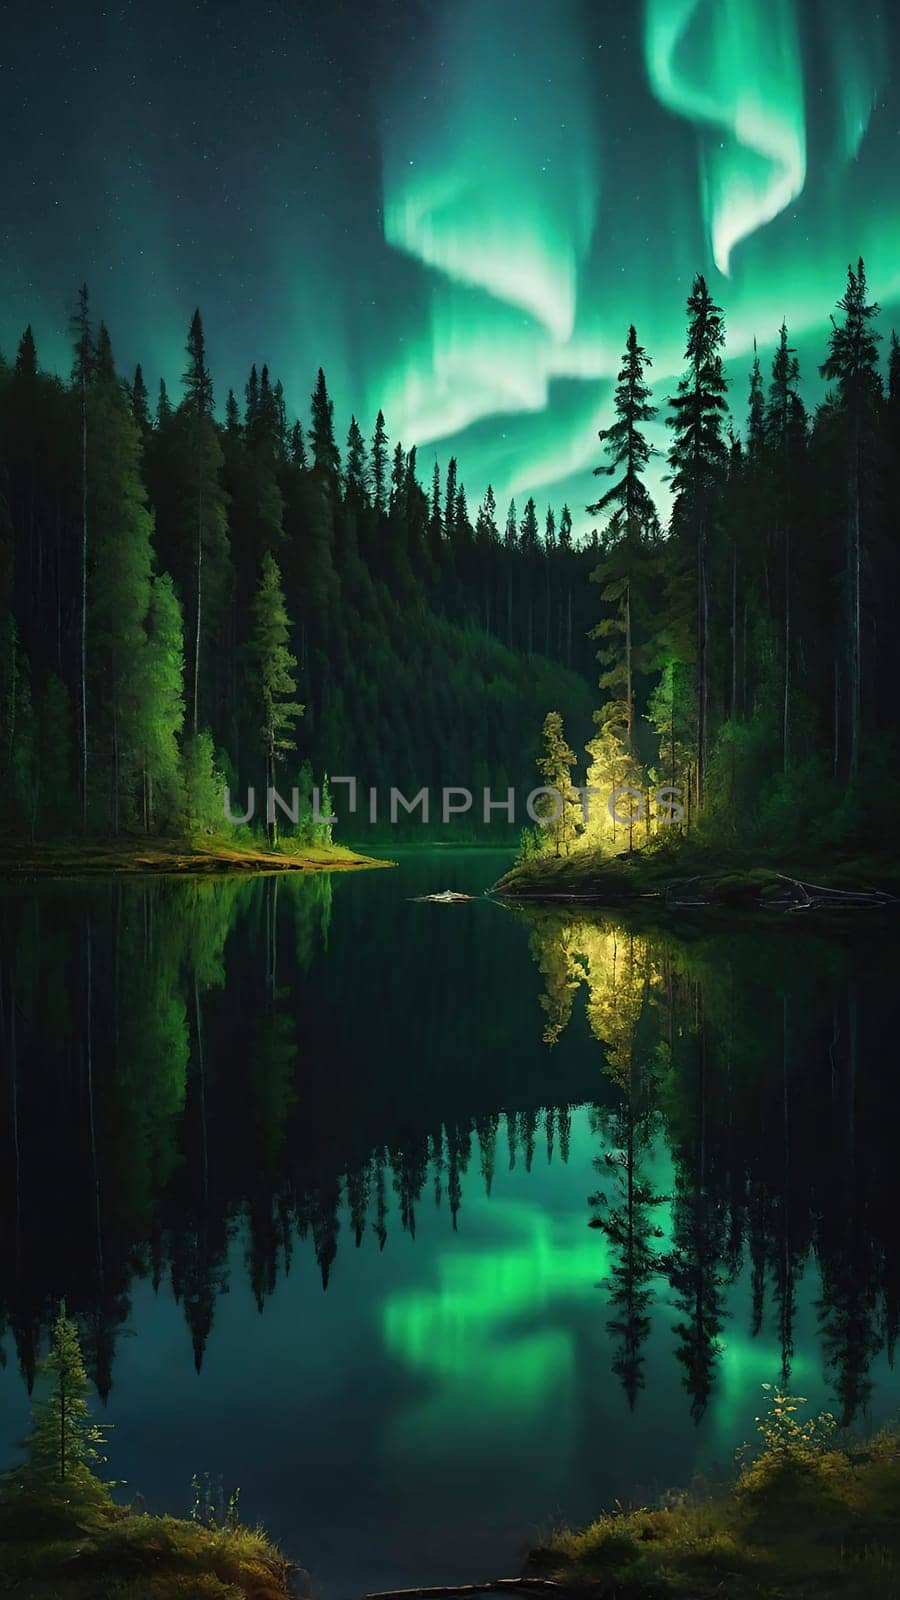 Aurora borealis, northern lights over lake and forest. Nature background and wallpaper.Vertical image.Under the Northern Lights: Enchanting Forest and Lake Scenery in Nature's Embrace